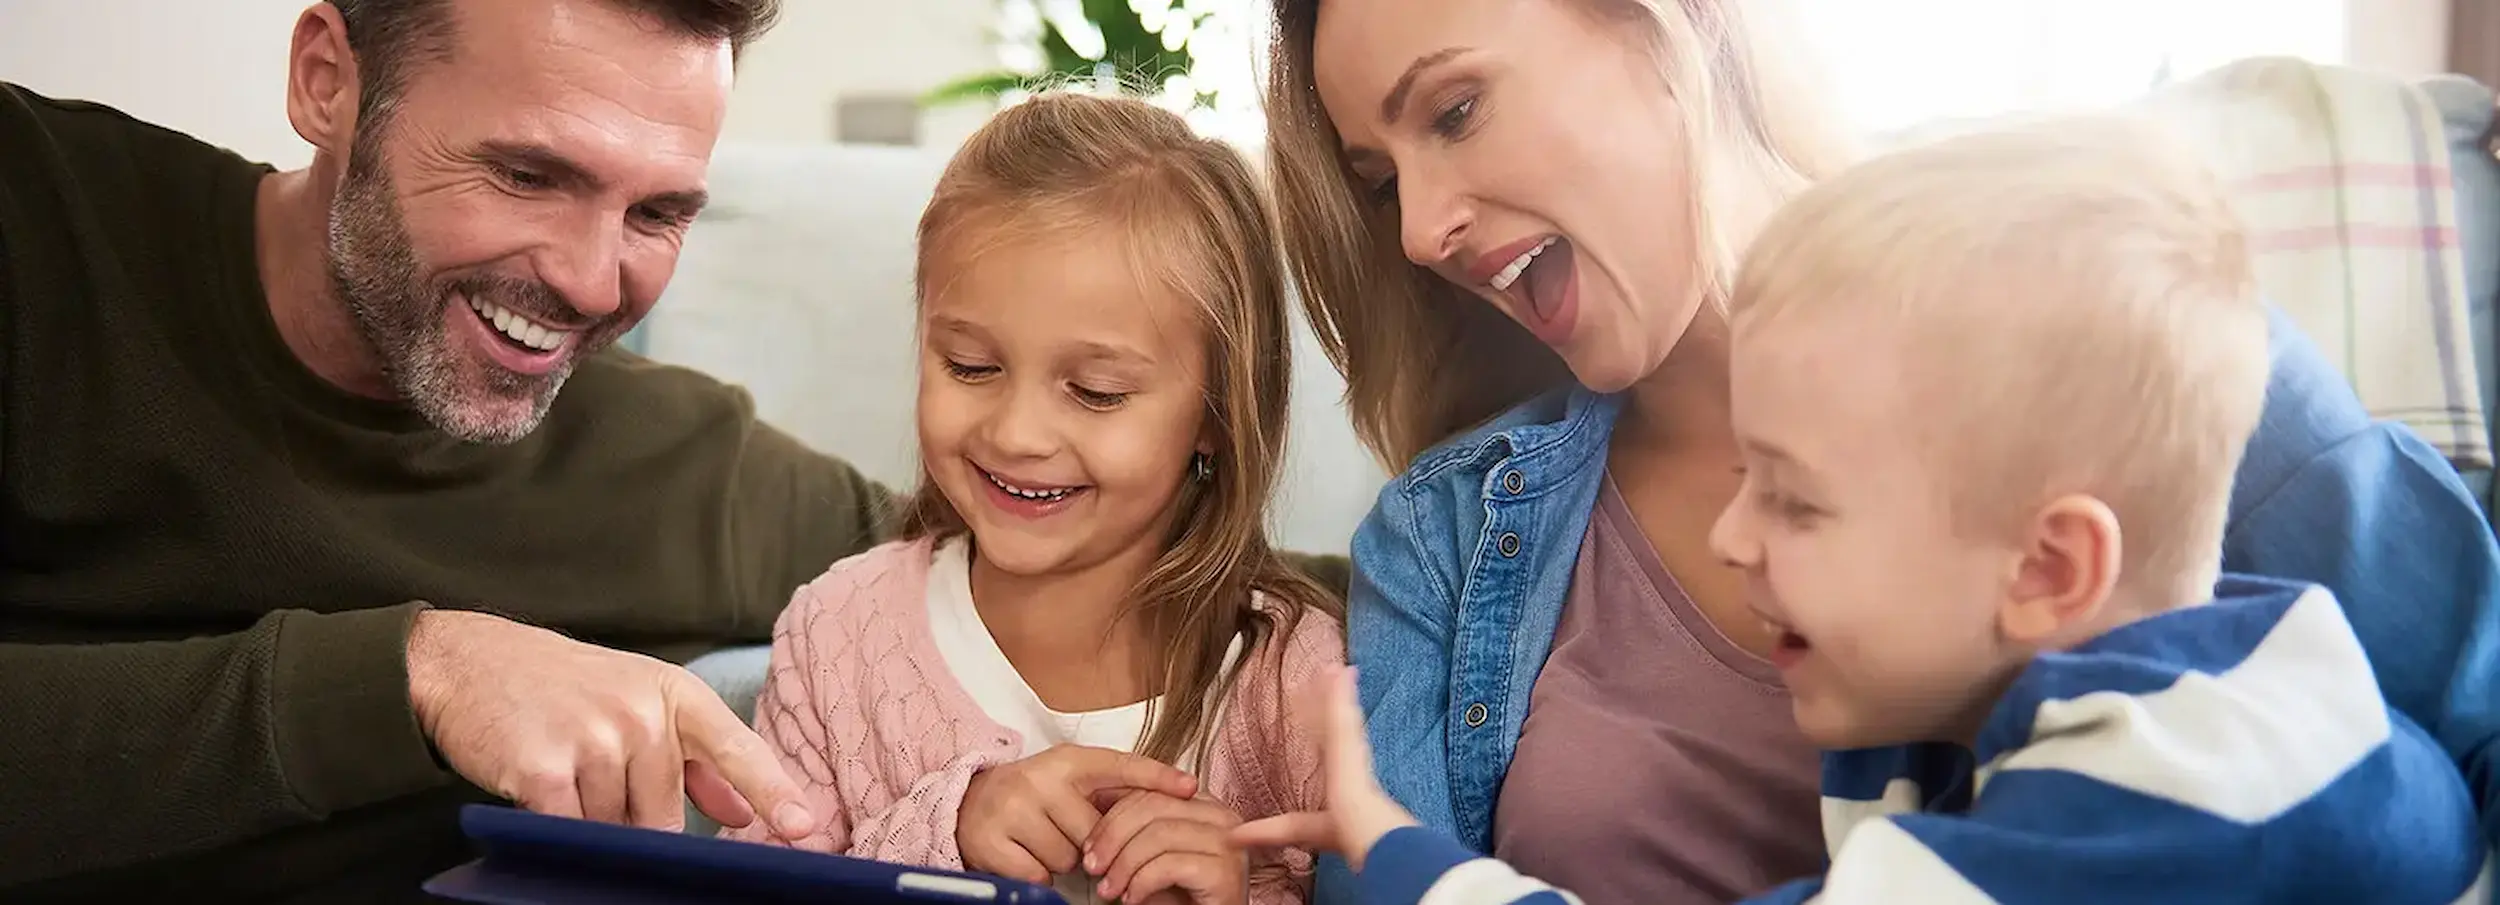 Smiling family of four laughing and pointing at tablet device in bright living room interior.